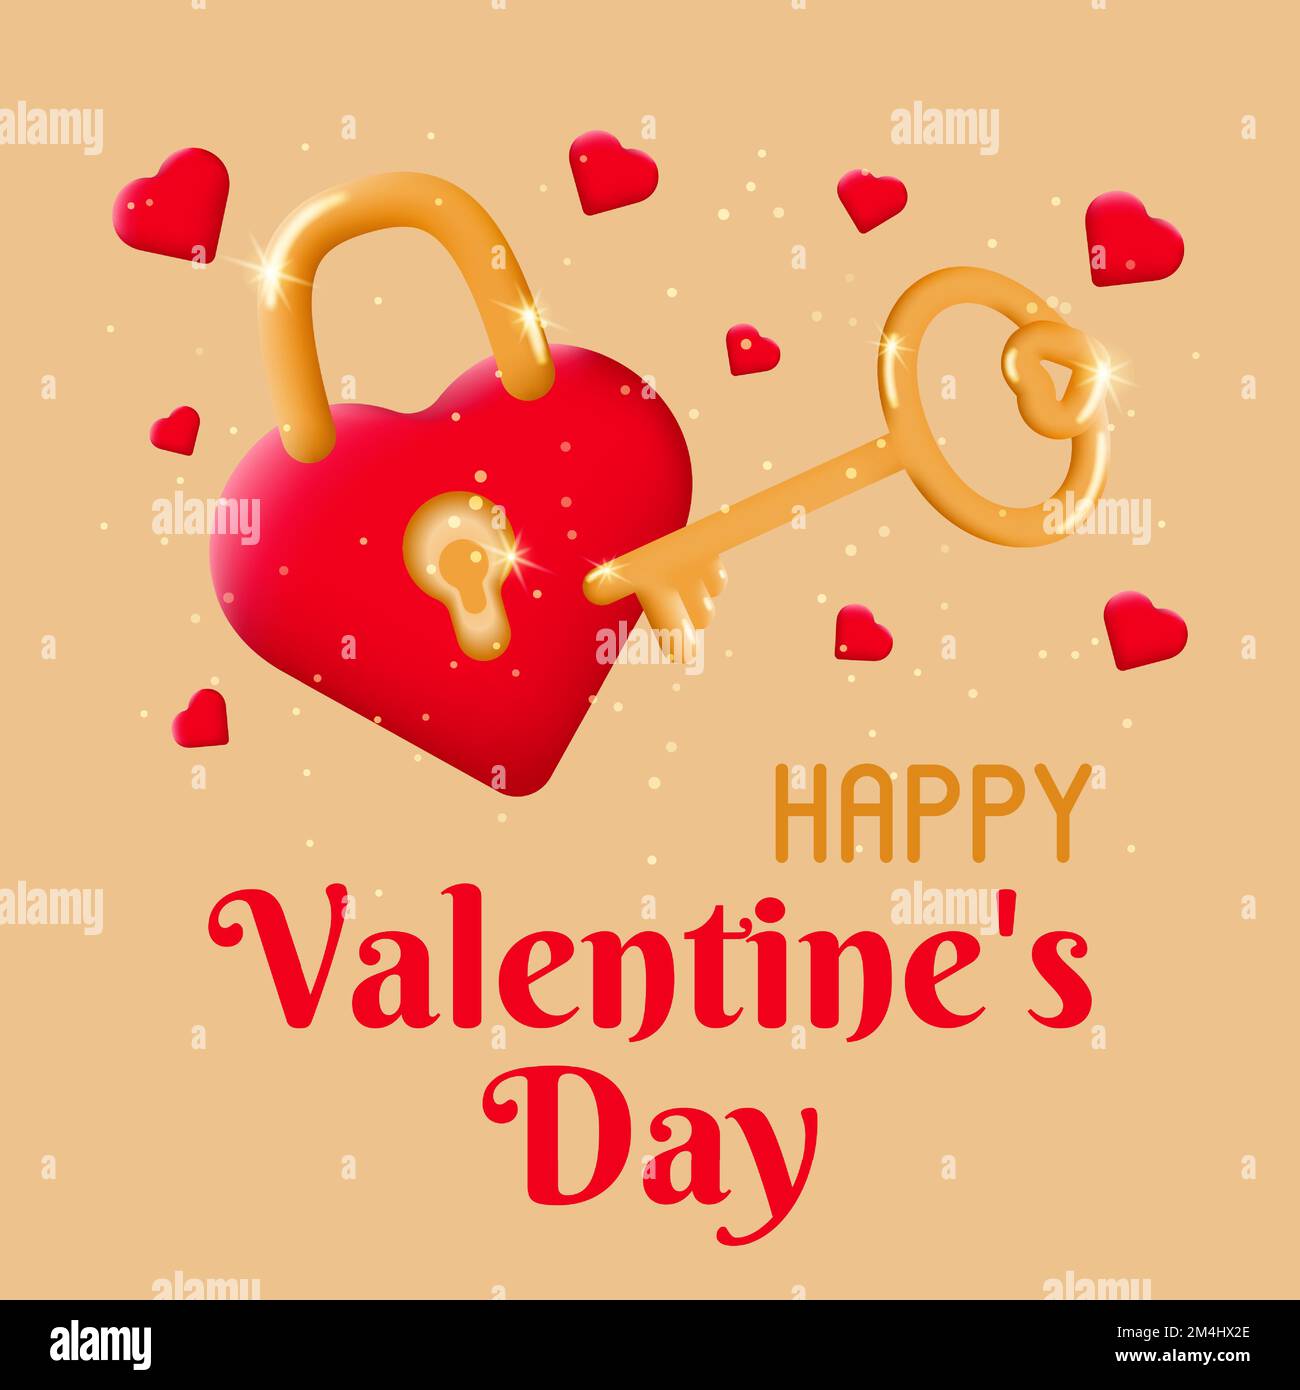 Postcard with red heart shaped lock and golden shiny key. Valentine card with romantic love symbols. The concept of celebrating Valentine's Day and Stock Vector